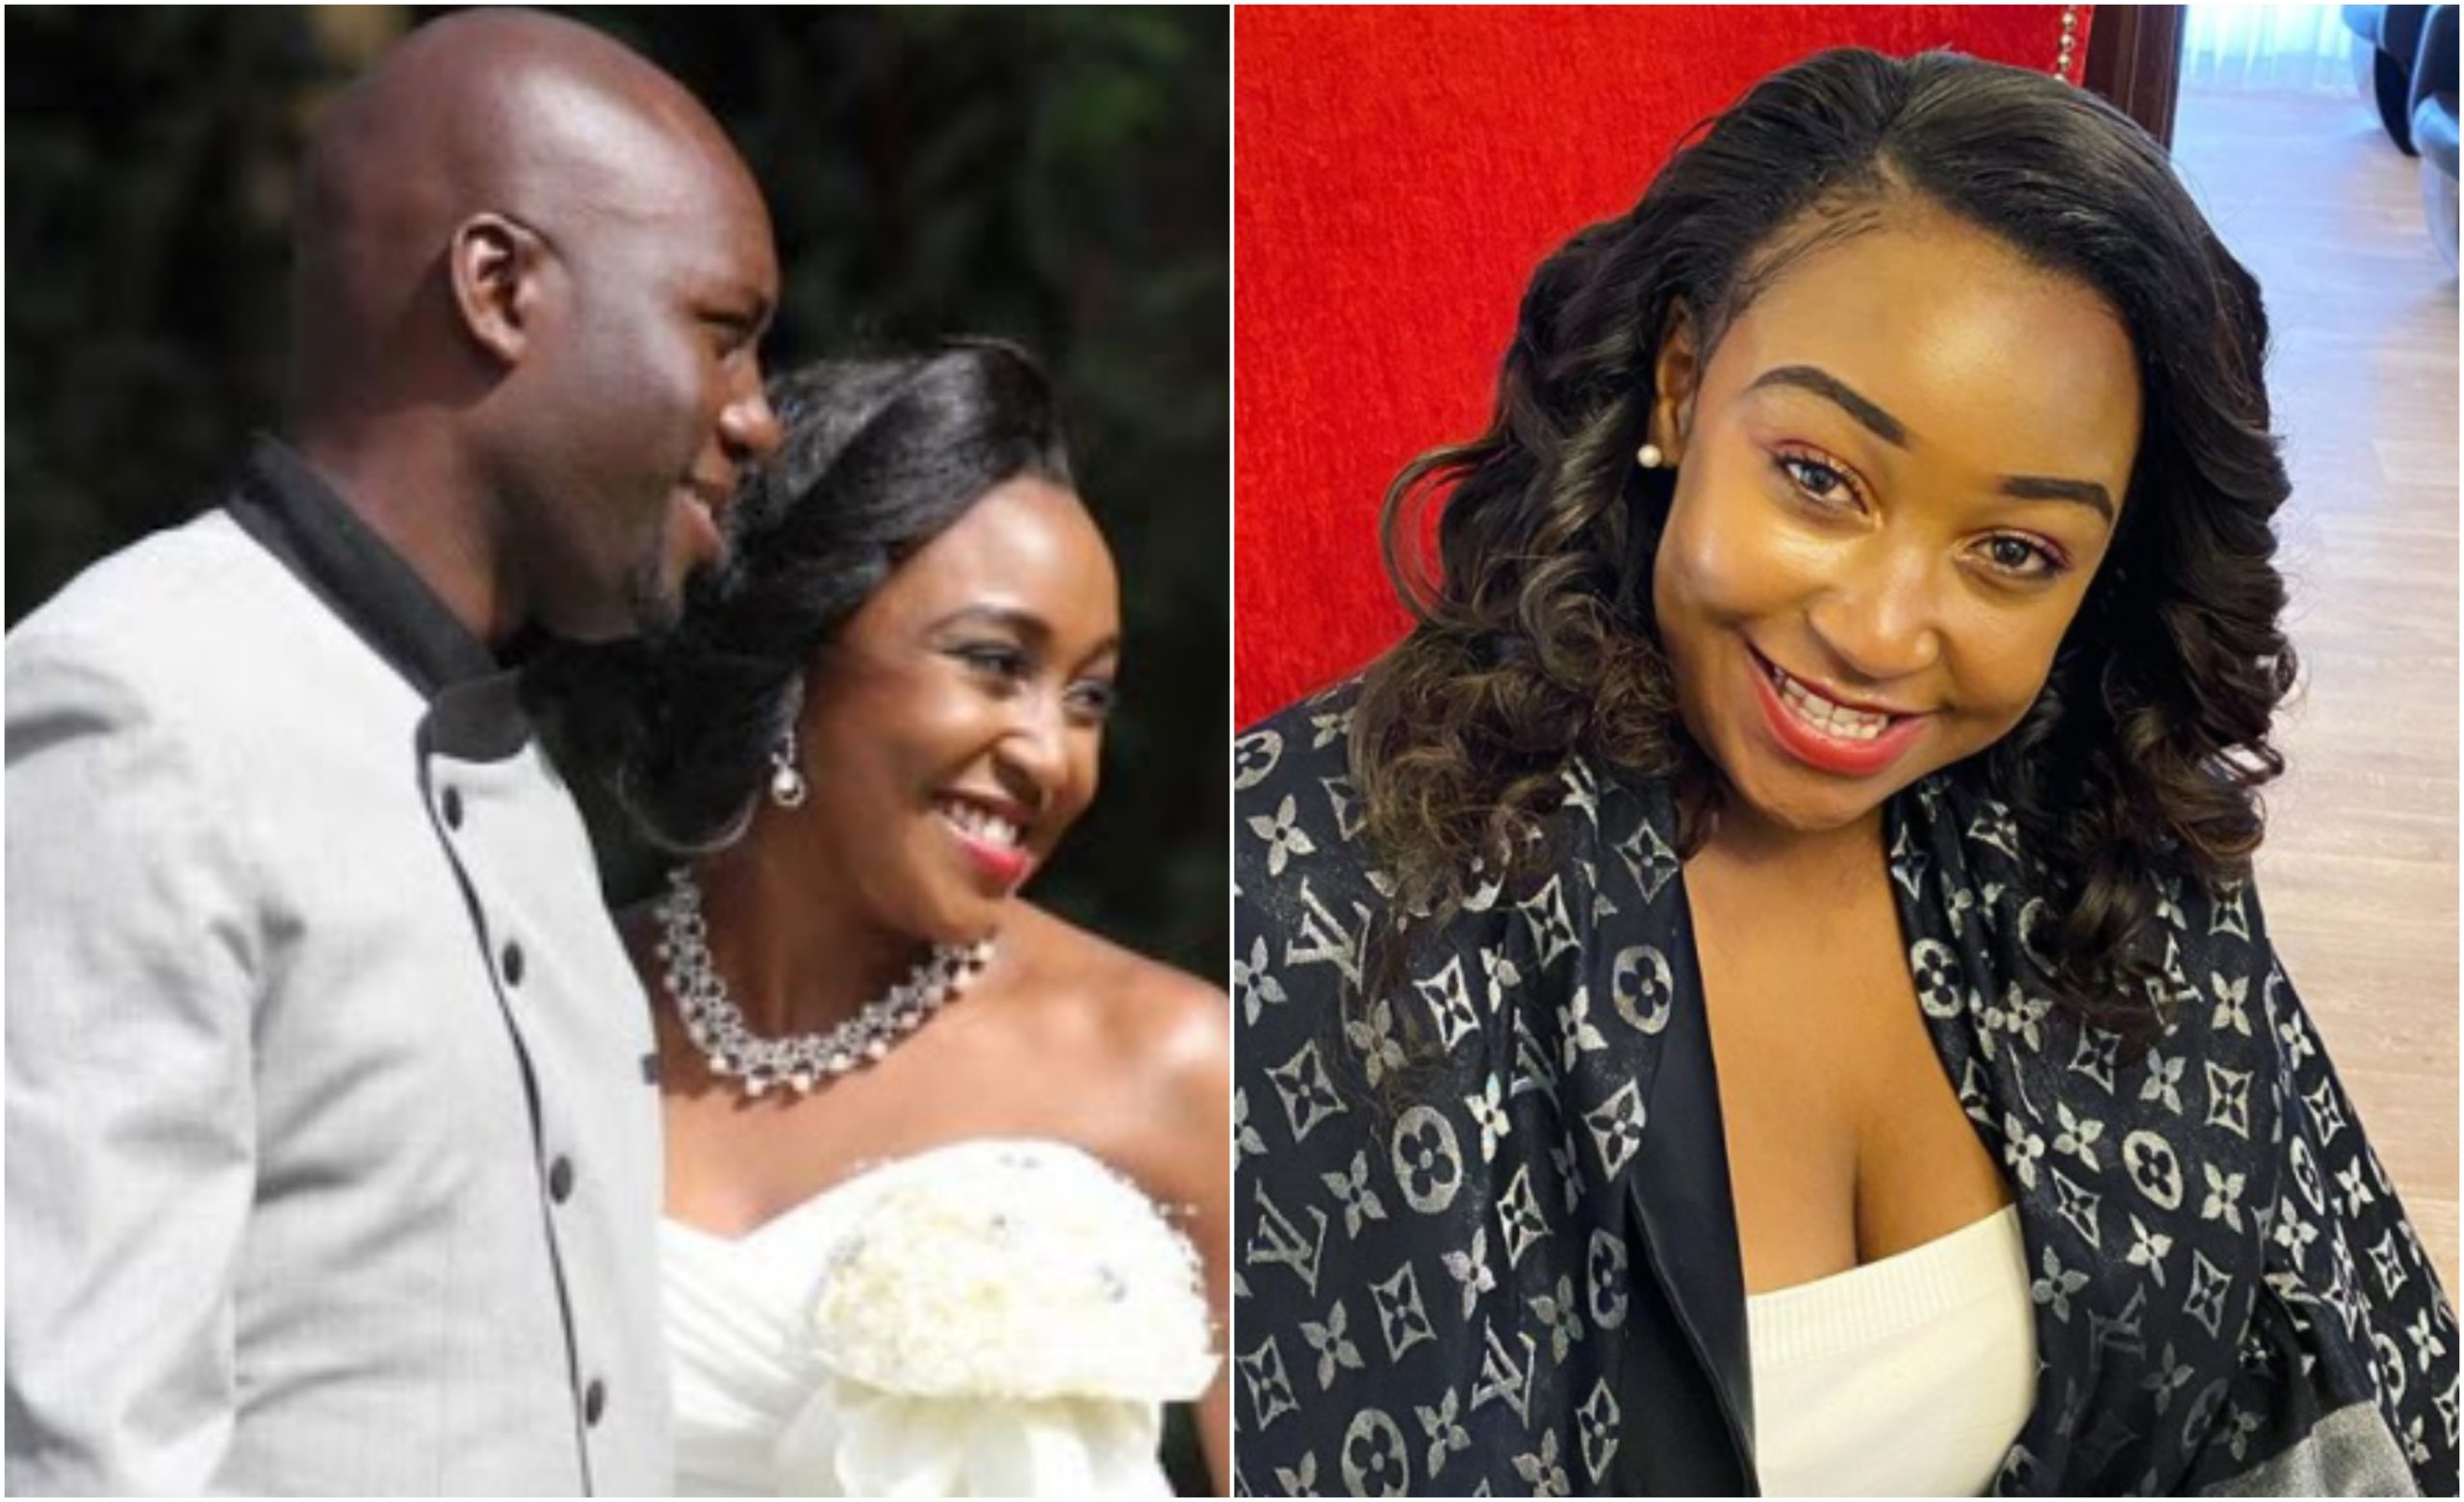 "My next wedding will be at the AG's office," Betty Kyallo reveals after failed grand wedding with Dennis Okari